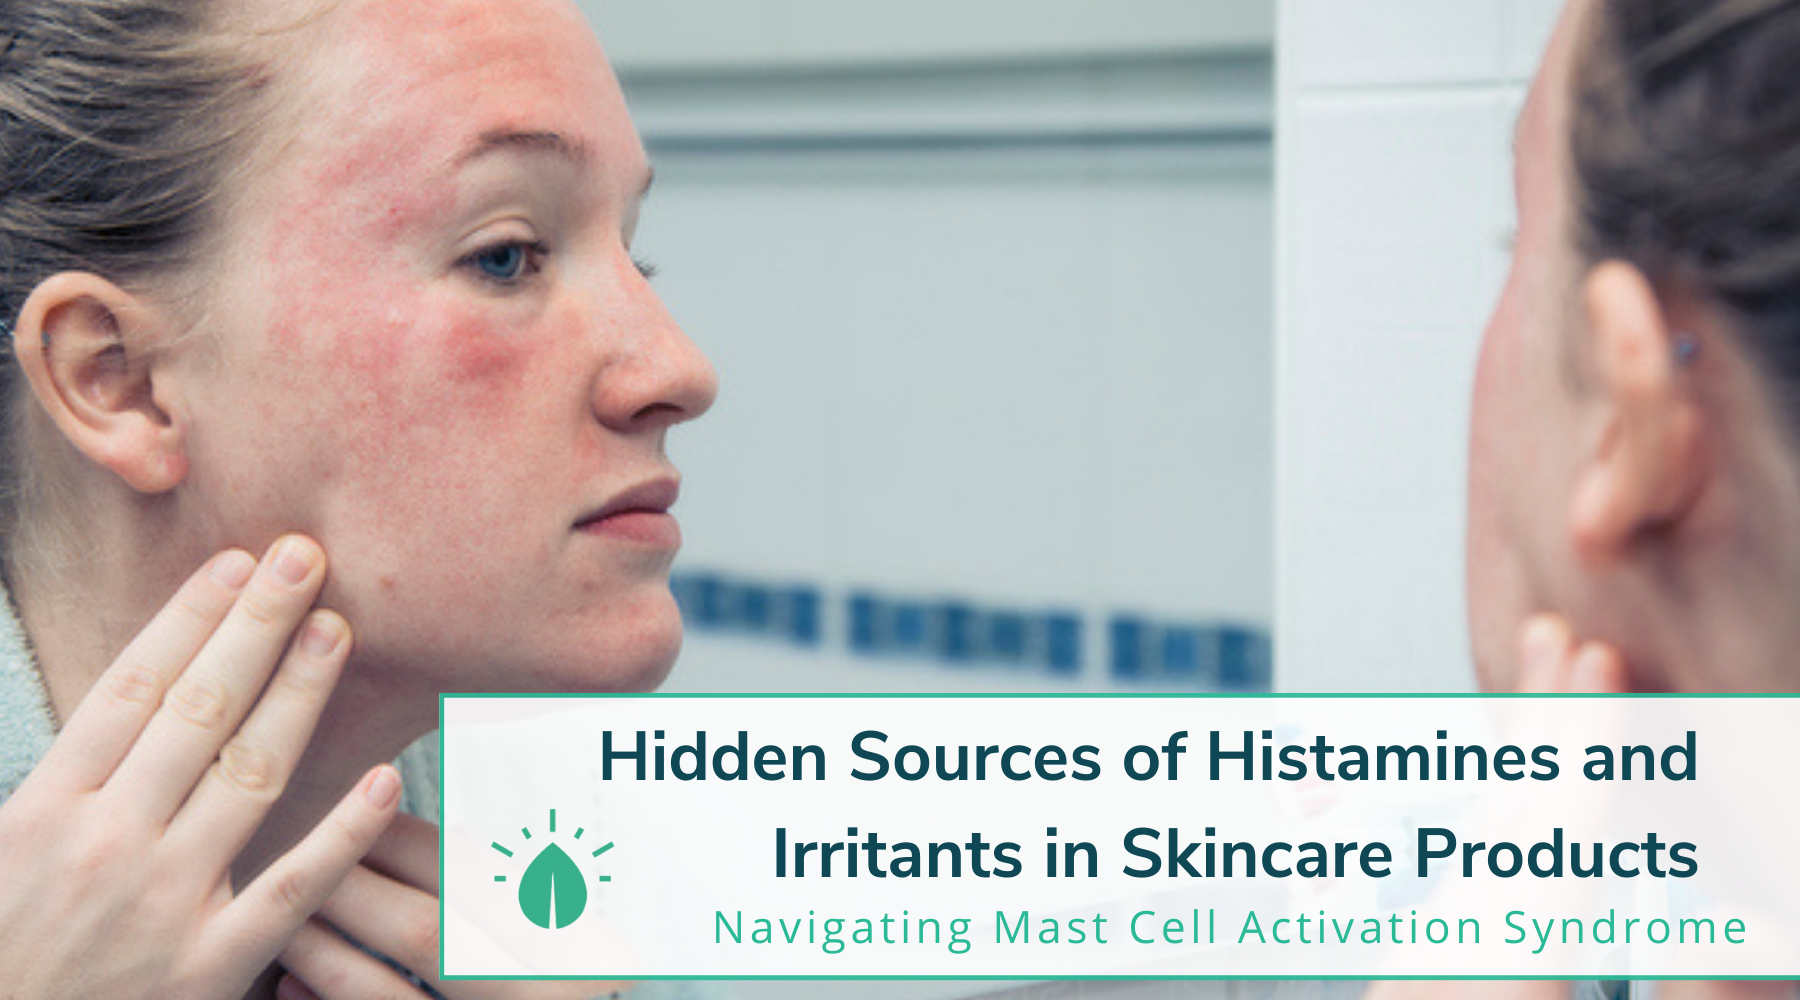 Hidden Sources of Histamines and Irritants in Skincare Products: Navigating Mast Cell Activation Syndrome